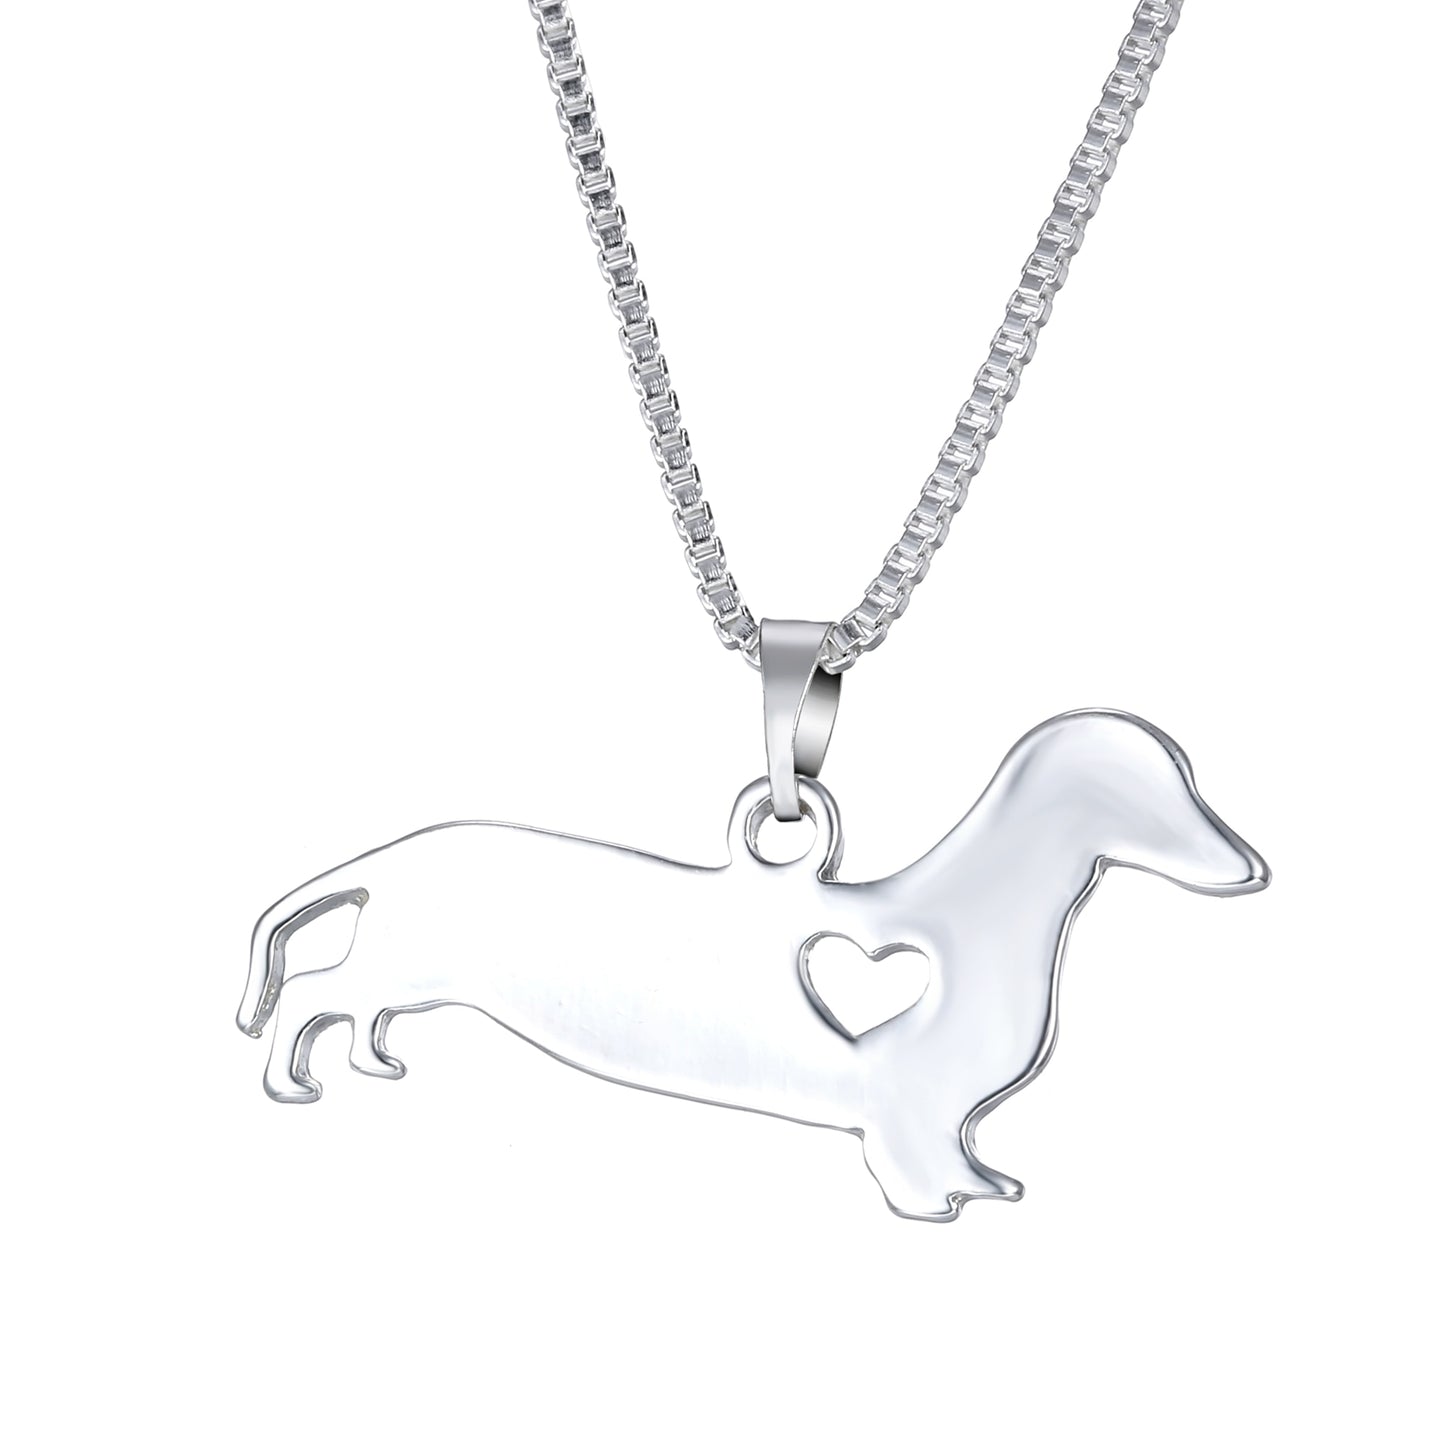 Dachshund Necklace Sterling Silver